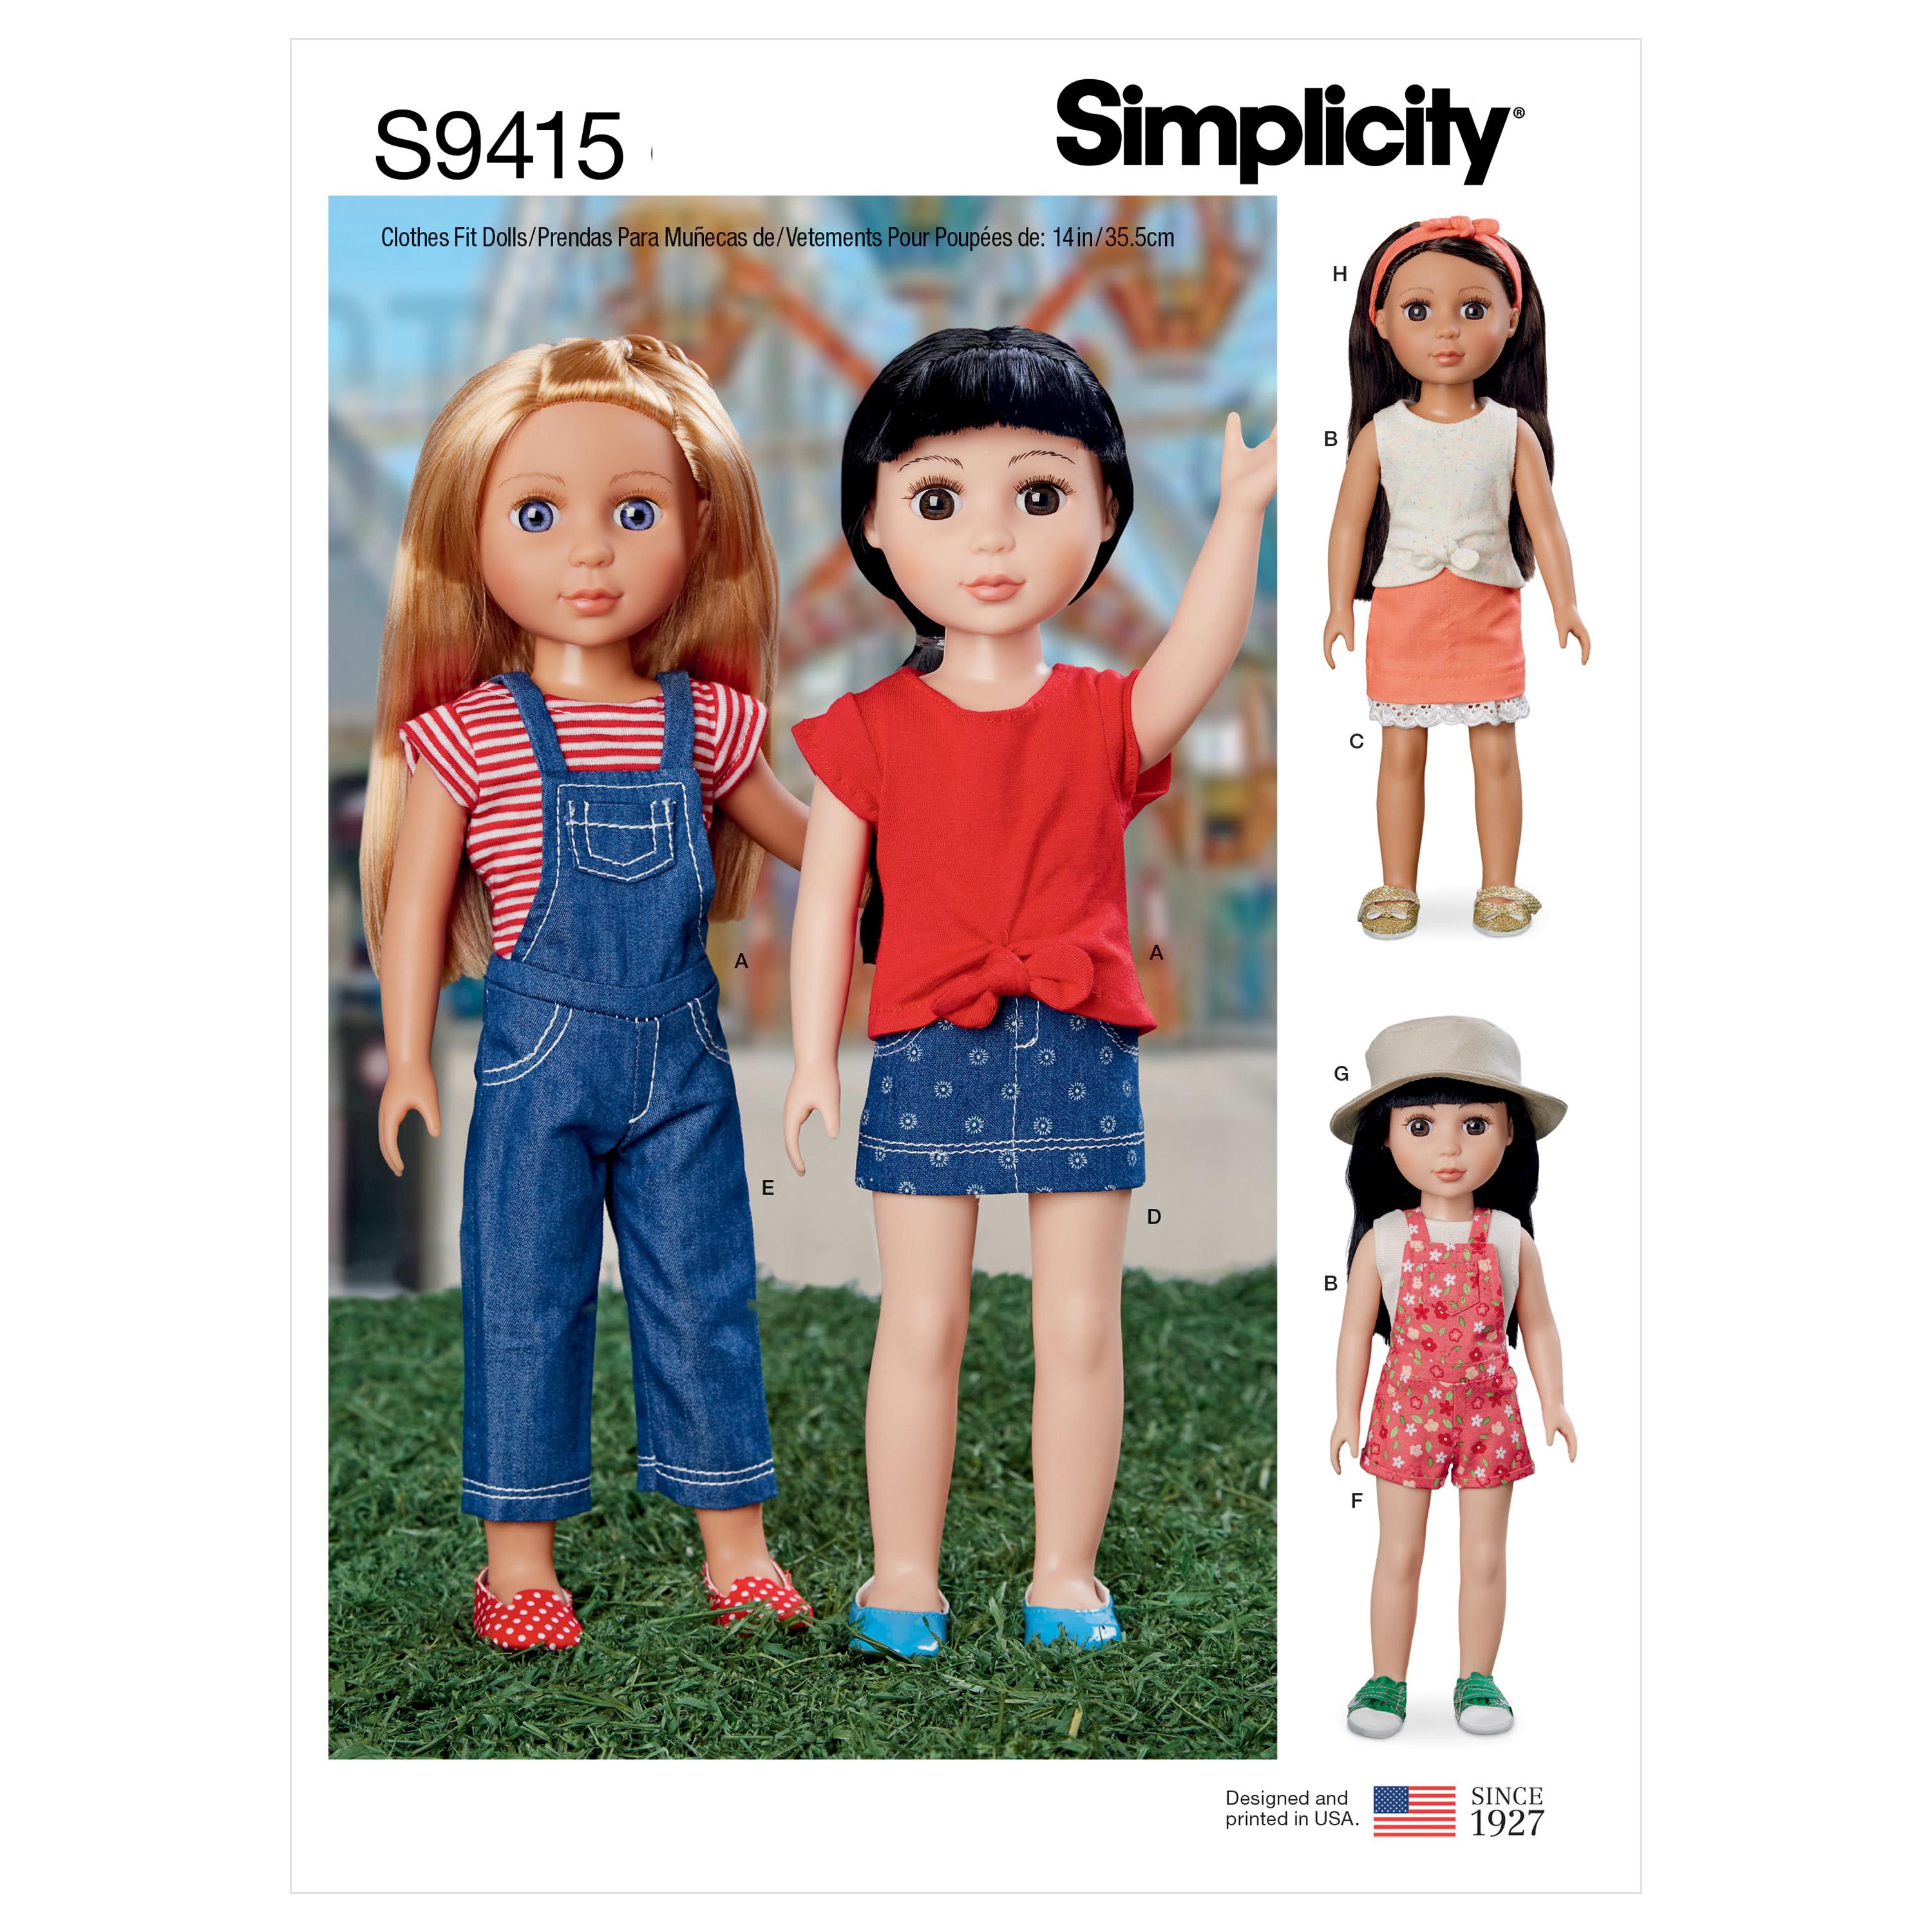 Simplicity Sewing Pattern S9415 14" Doll Clothes